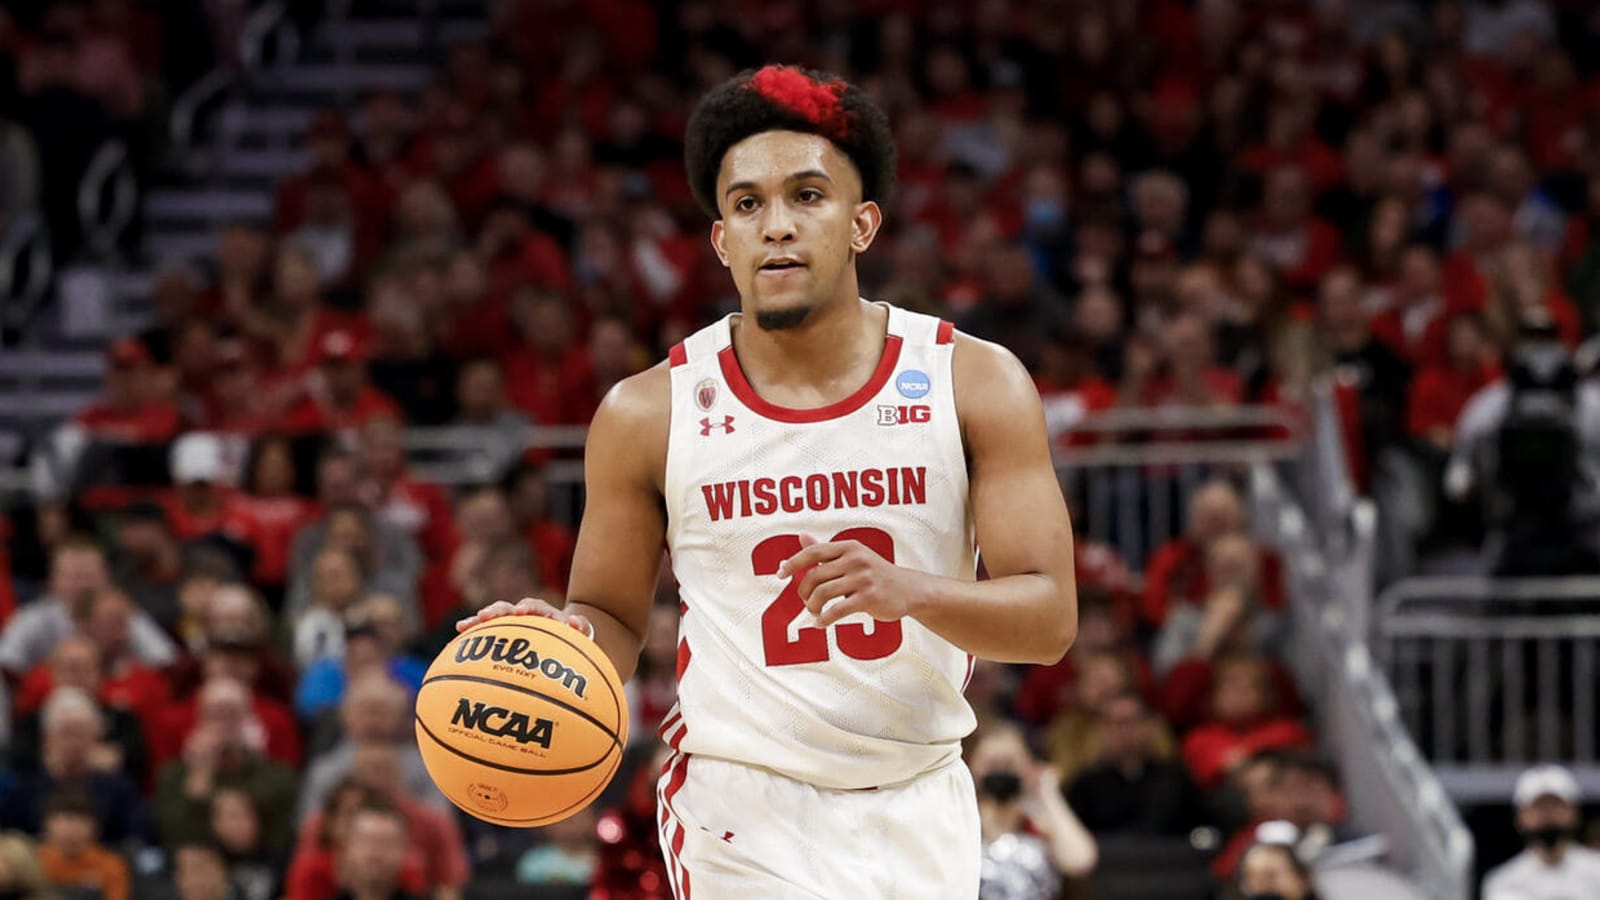 An early look at the 2022 Badgers basketball starting lineup